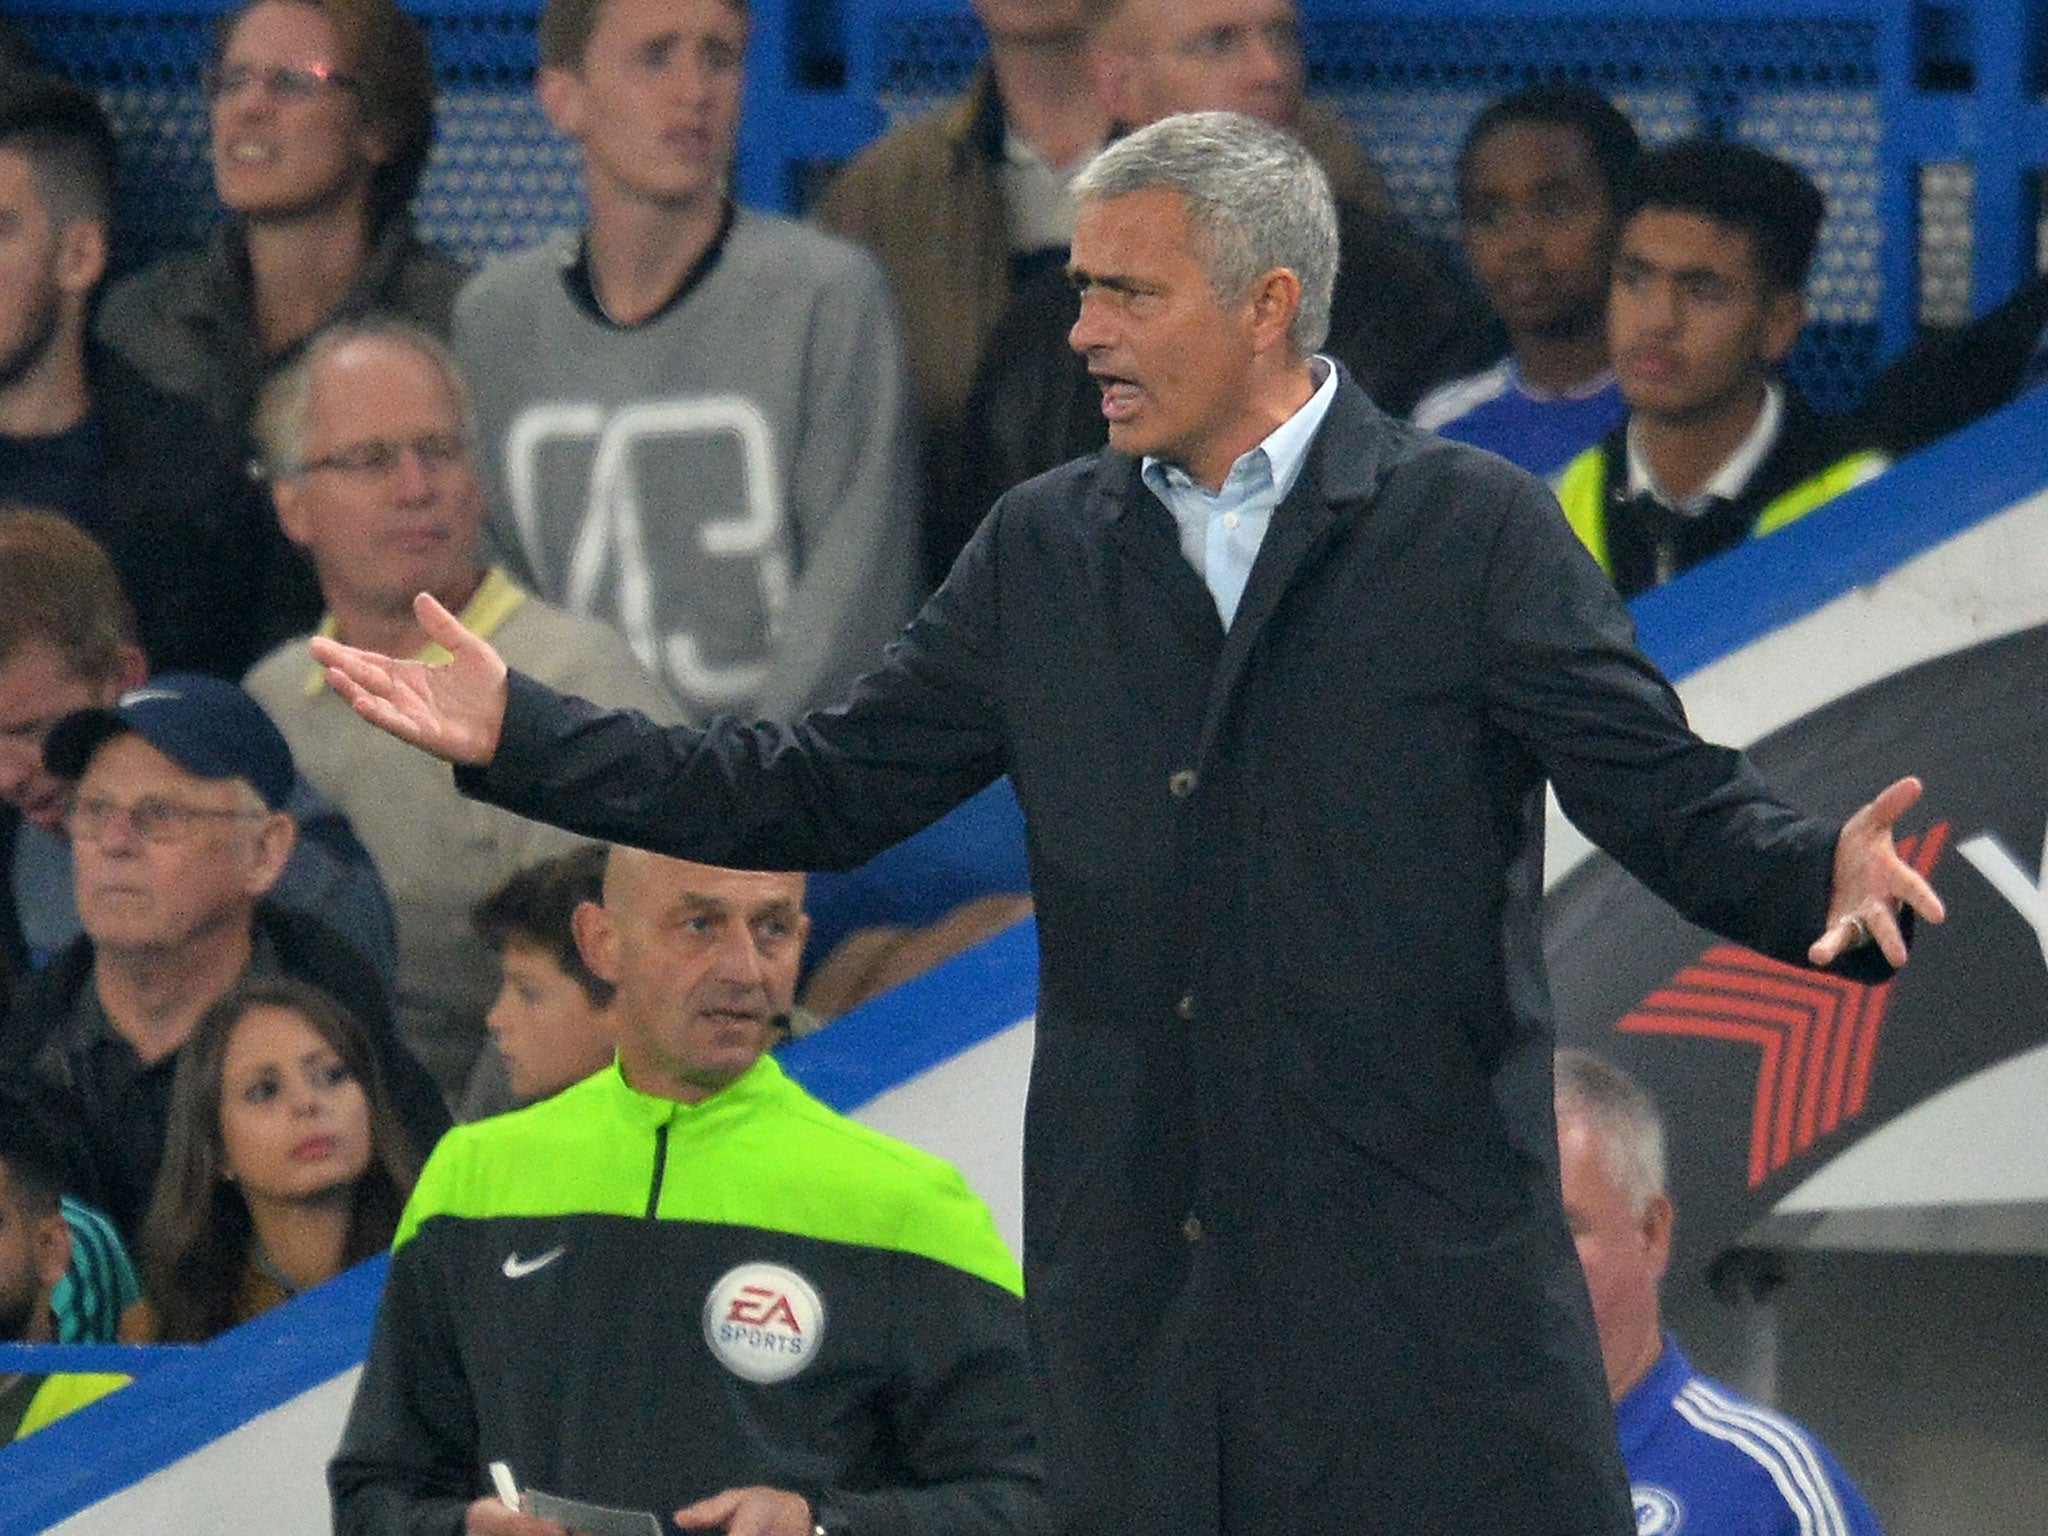 Jose Mourinho reacts on the sideline during Chelsea's 3-1 defeat to Southampton